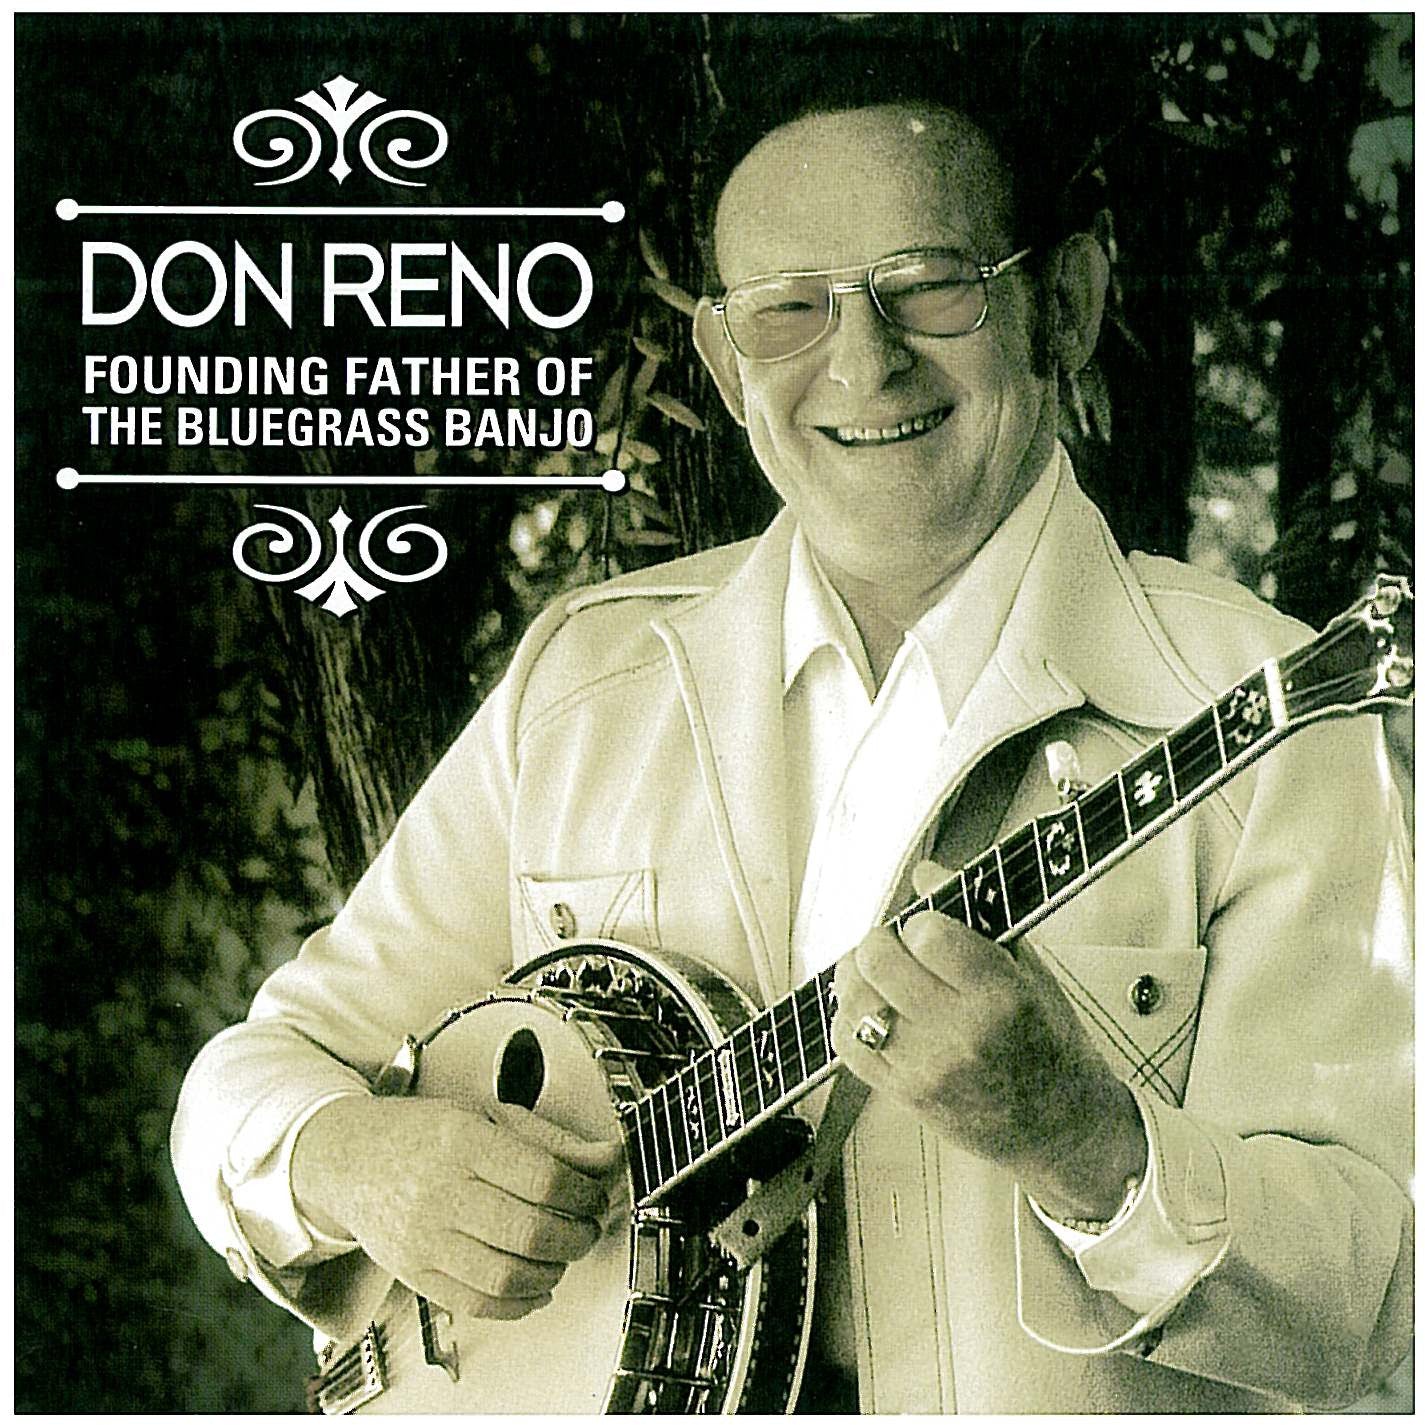 Don Reno: Founding Father of the Bluegrass Banjo